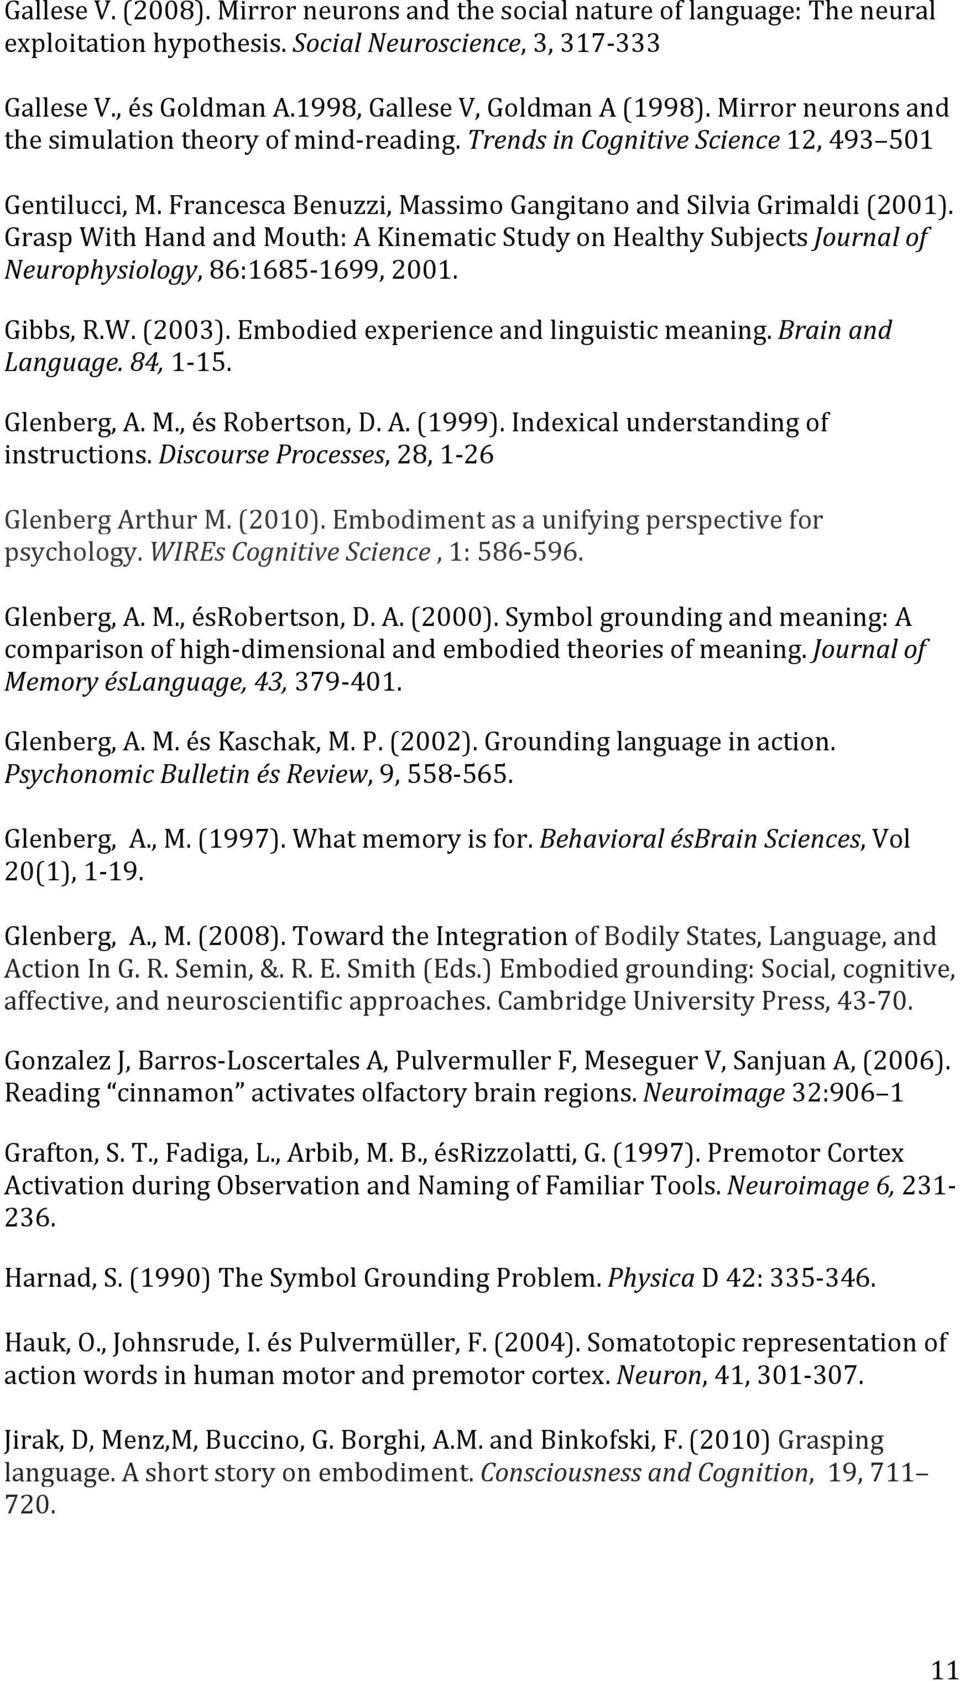 Grasp With Hand and Mouth: A Kinematic Study on Healthy Subjects Journal of Neurophysiology, 86:1685-1699, 2001. Gibbs, R.W. (2003). Embodied experience and linguistic meaning. Brain and Language.